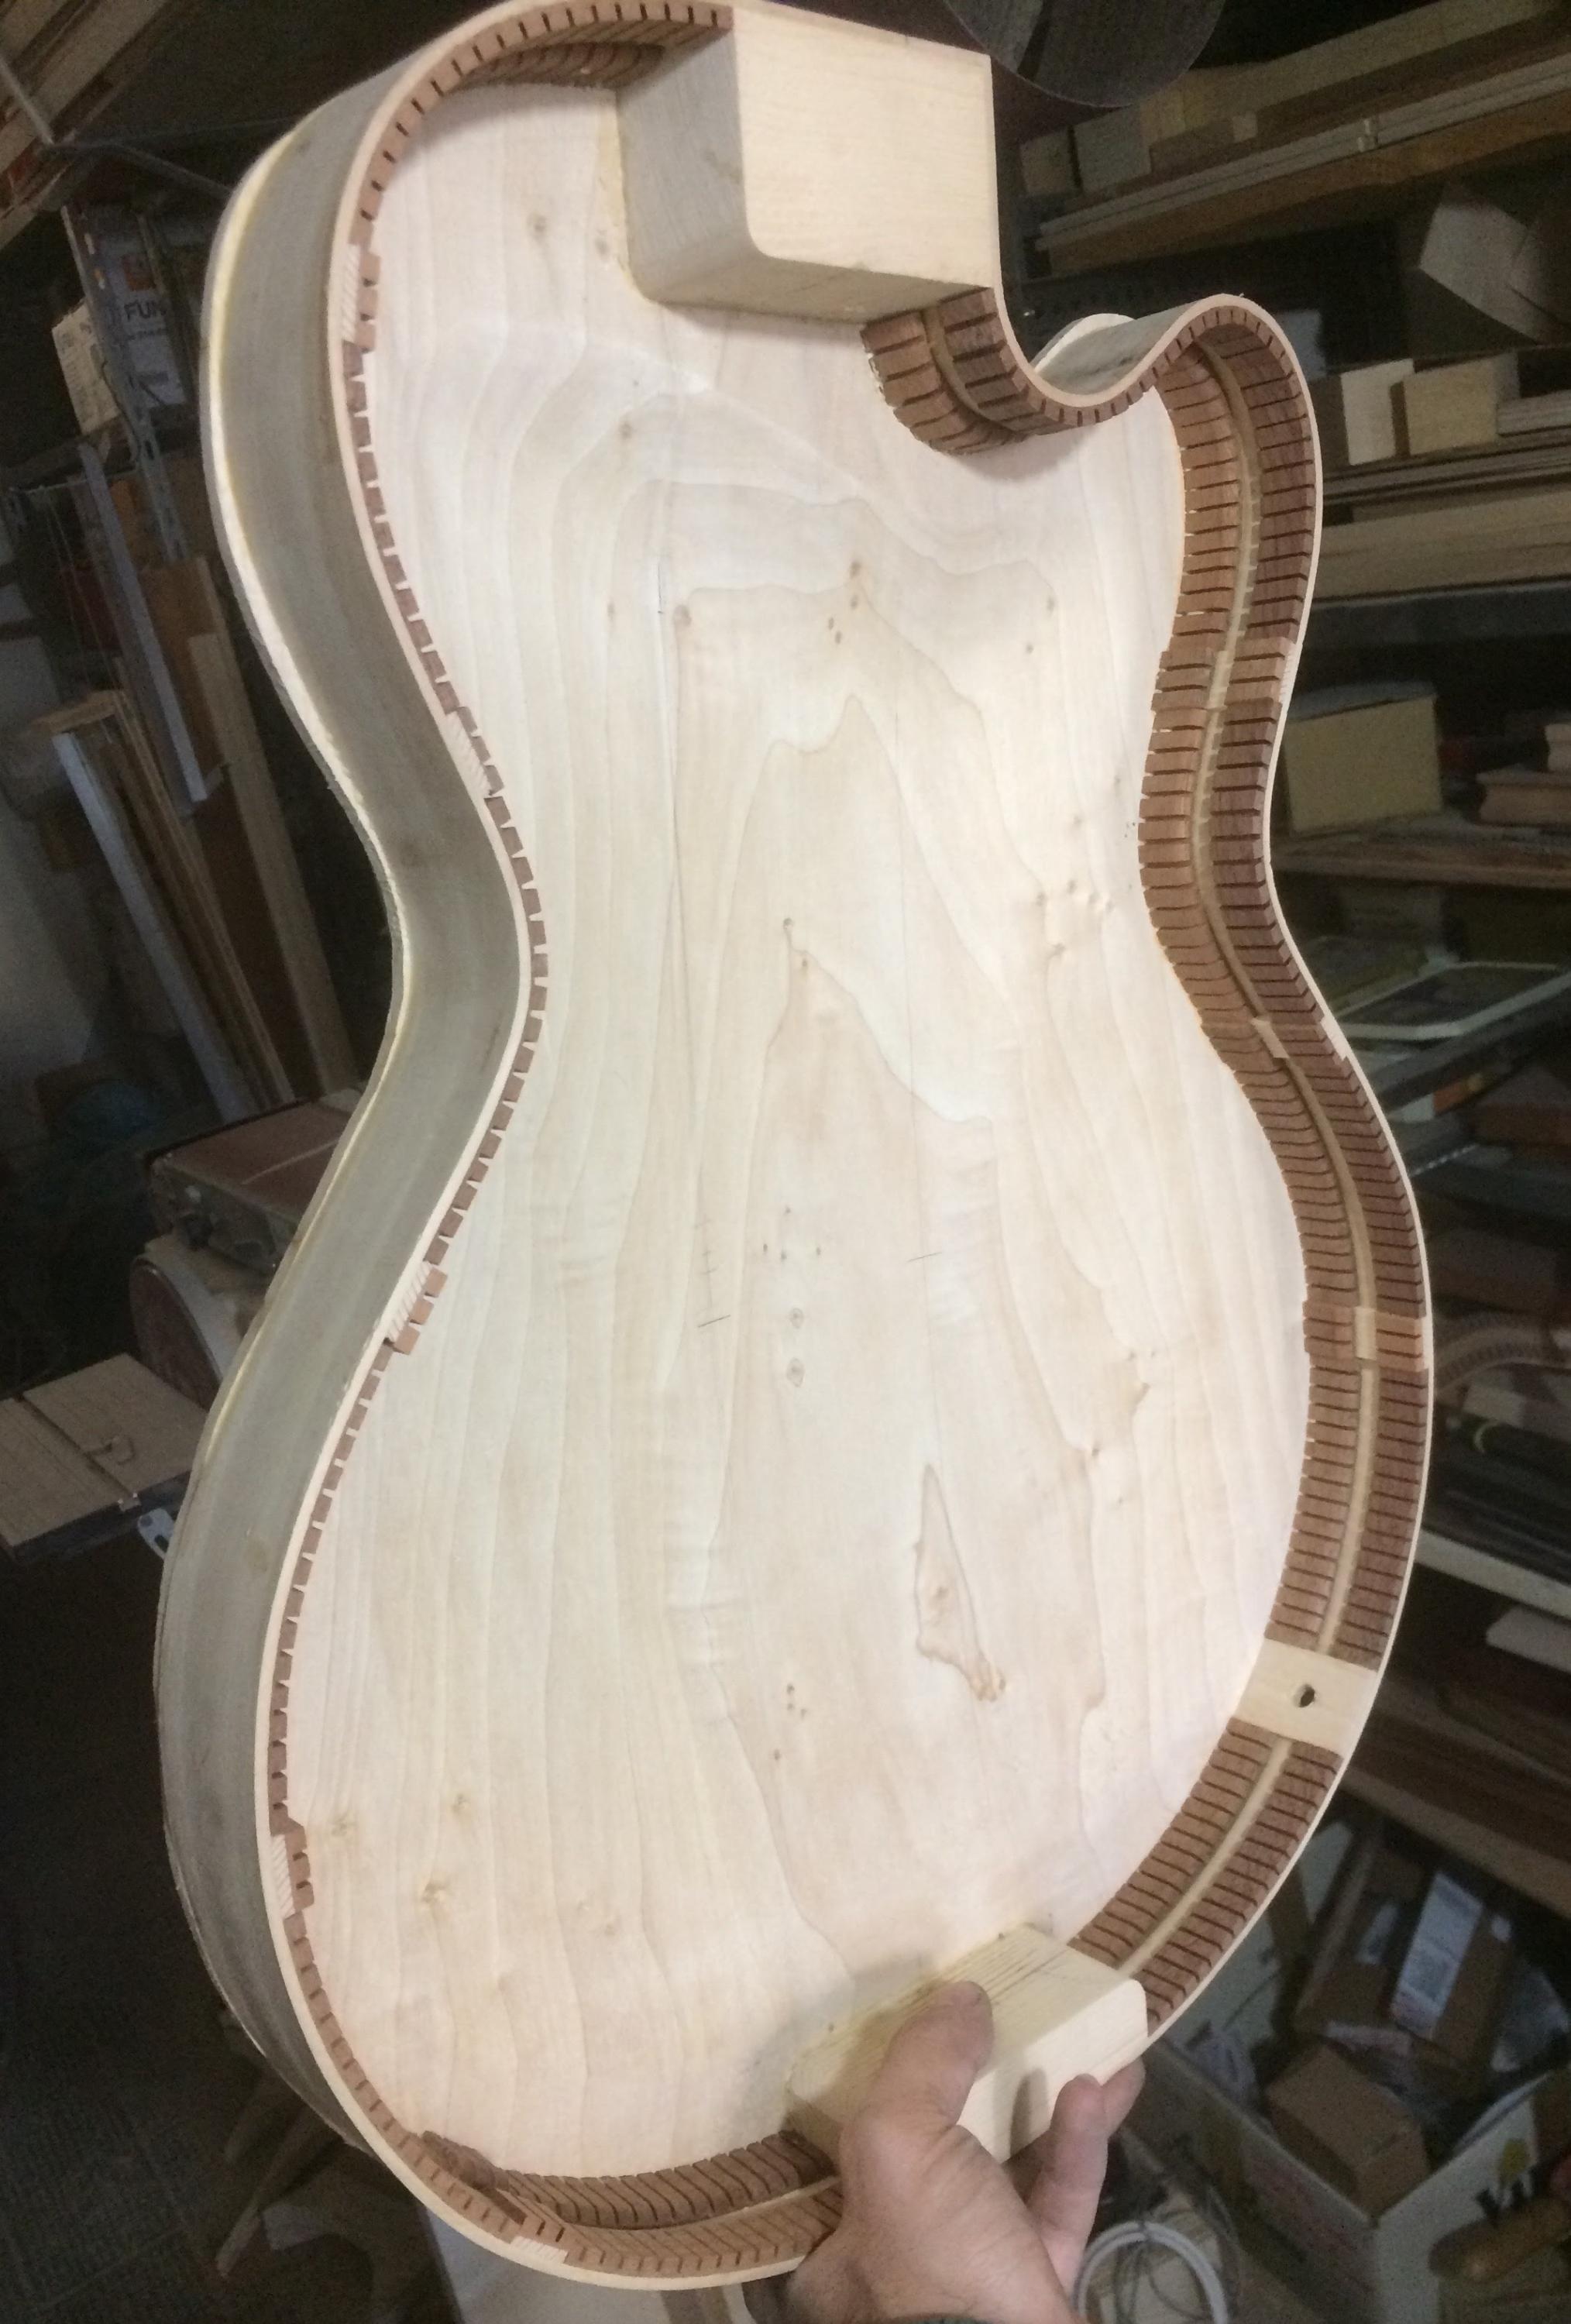 Solid wood Archtop build-img_4128-jpg